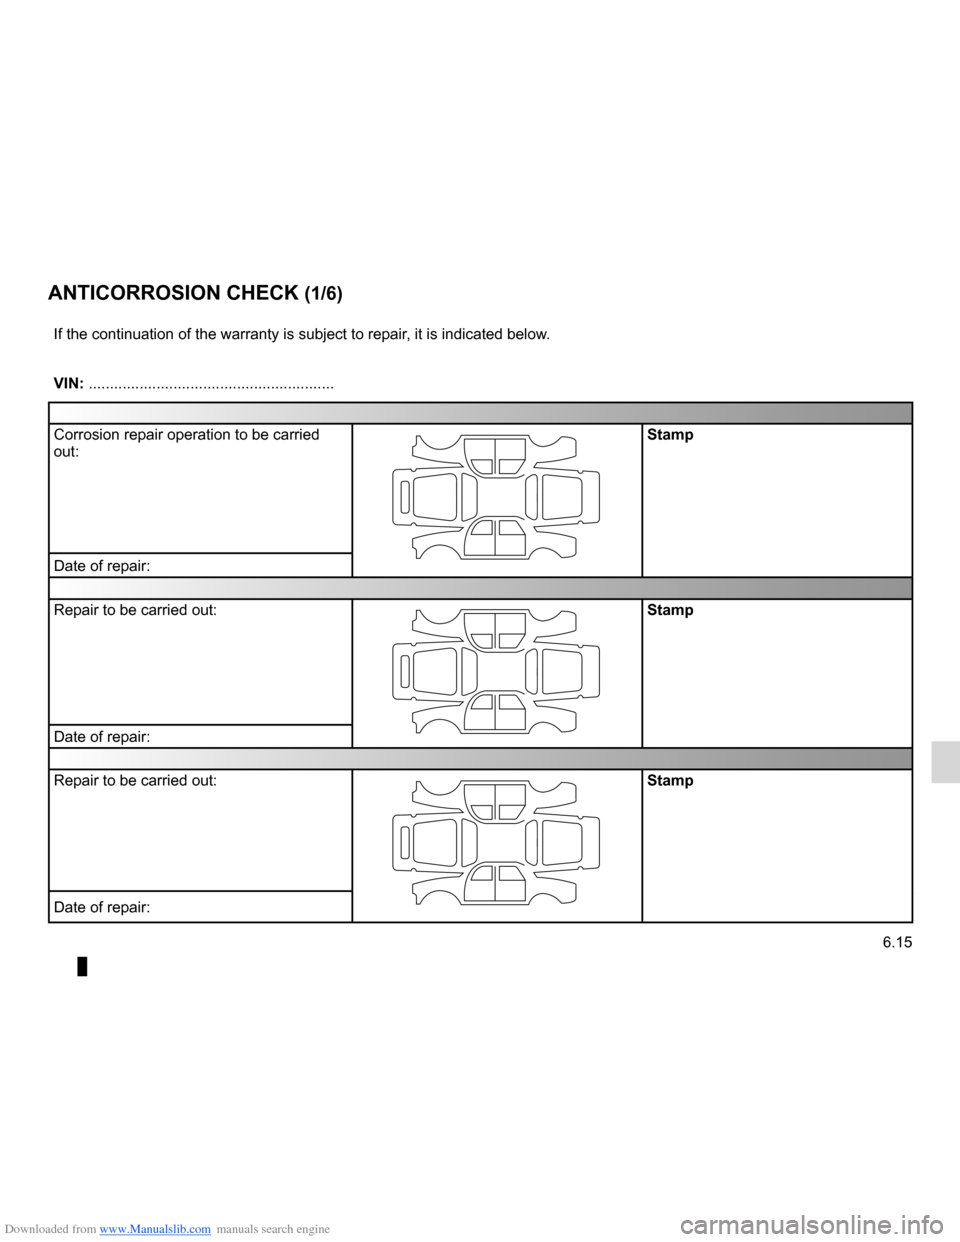 RENAULT CLIO 2012 X85 / 3.G Owners Manual Downloaded from www.Manualslib.com manuals search engine anti-corrosion check ............................. (up to the end of the DU)
6.15
ENG_UD10976_1
Contrôle anticorrosion (1/6) (X84 - X85 - X95 